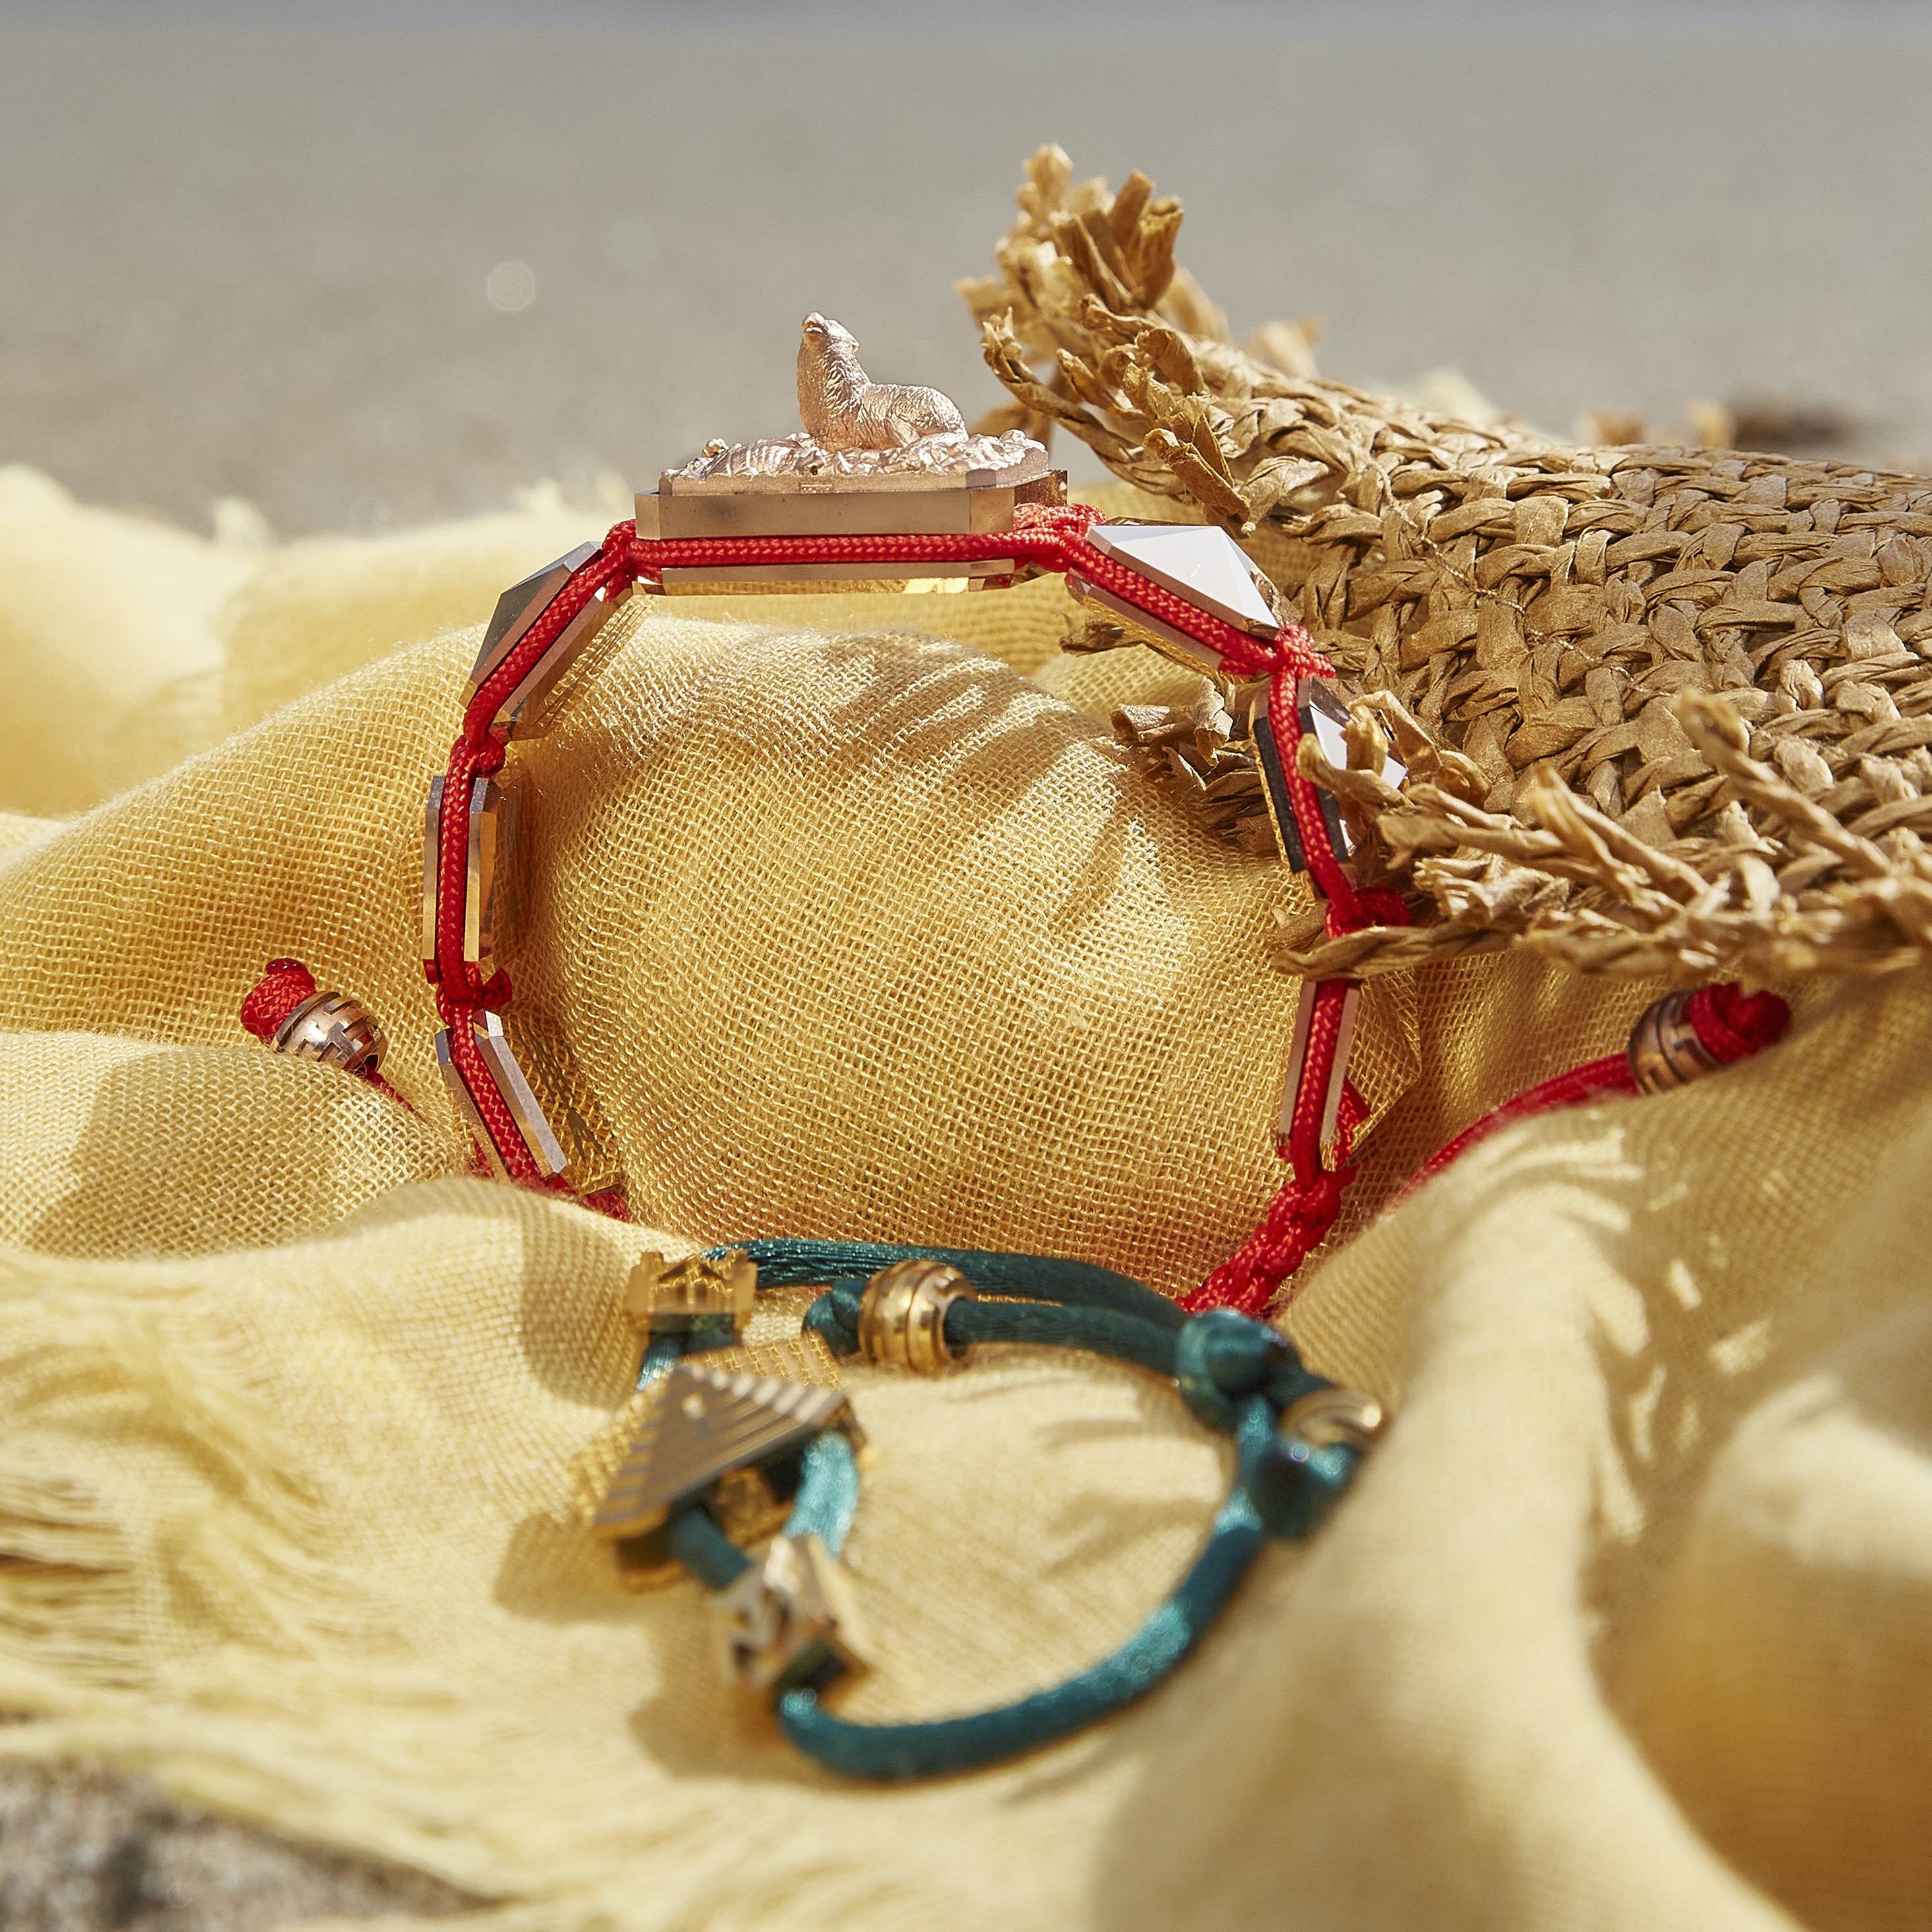 Selfmade bracelet with ceramic and sculpture finished in 18k Rose Gold complemented with a red coloured cord.